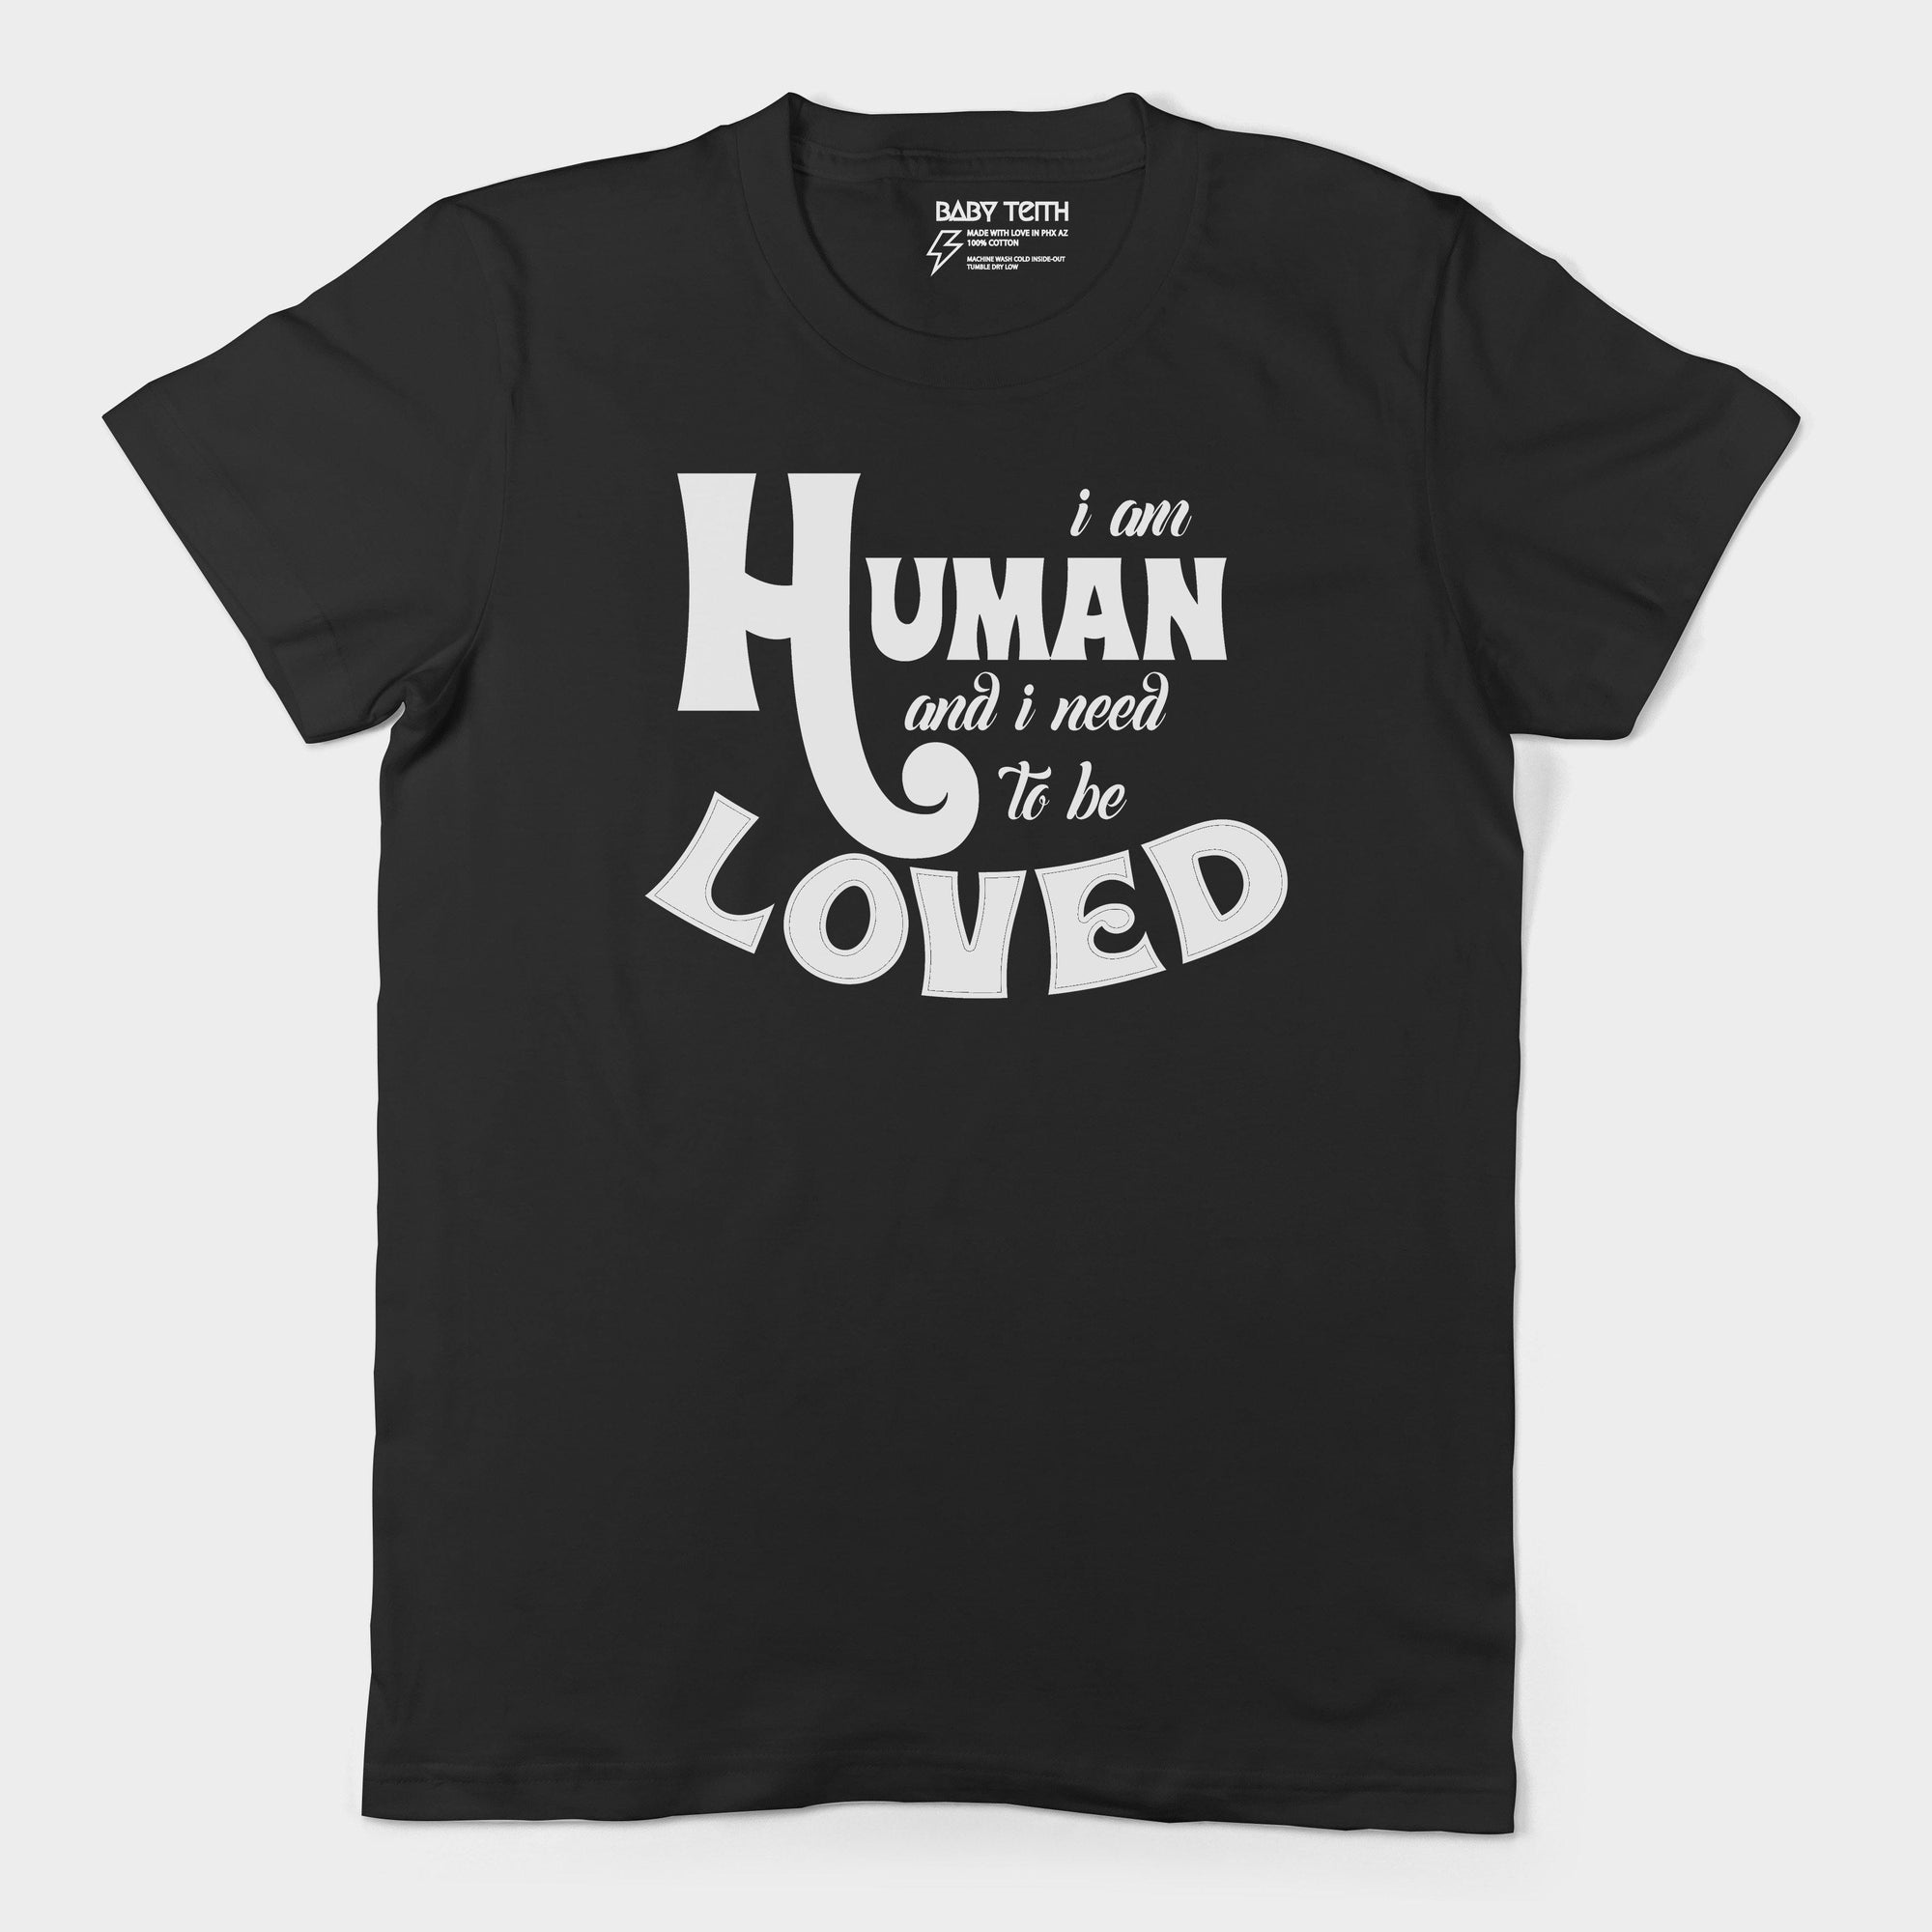 "I am Human" Adult's Unisex Tee (5 Colors) - Baby Teith